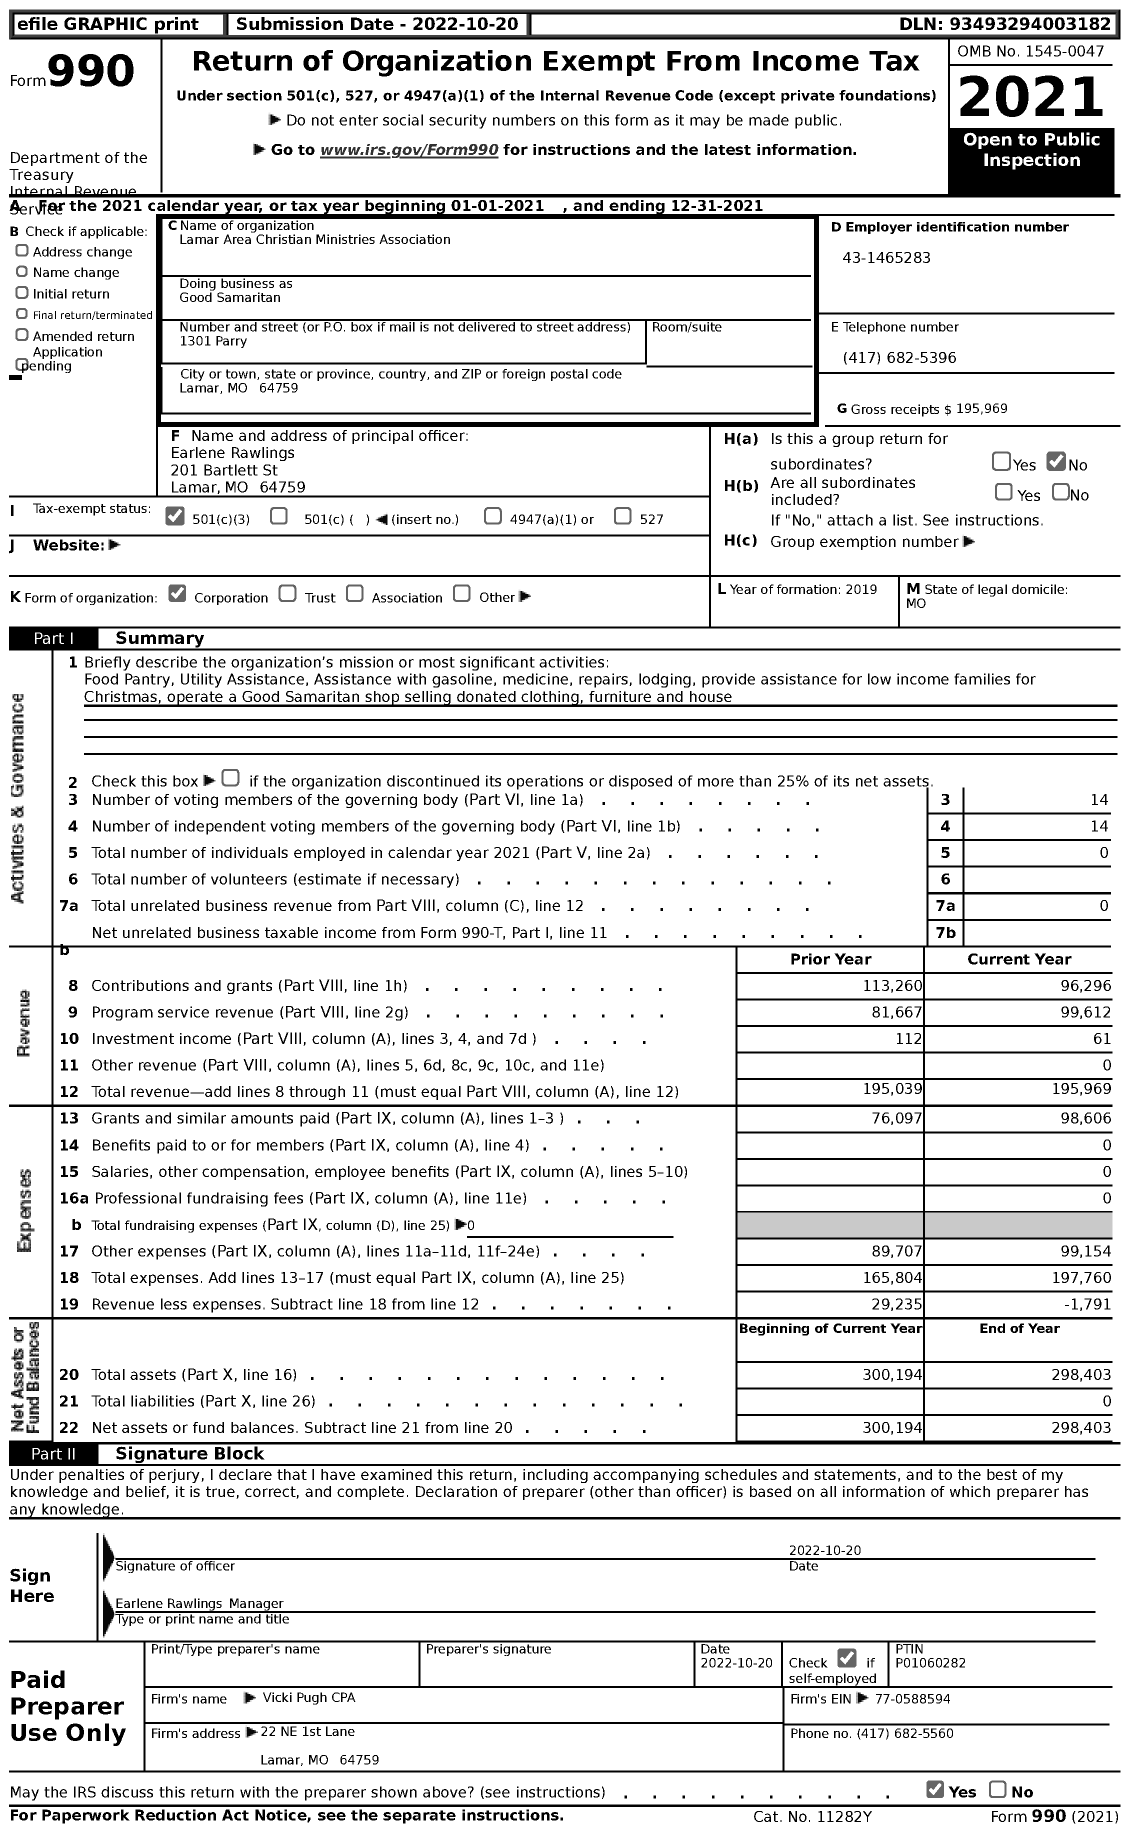 Image of first page of 2021 Form 990 for Good Samaritan / Lamar Area Christian Ministries Association